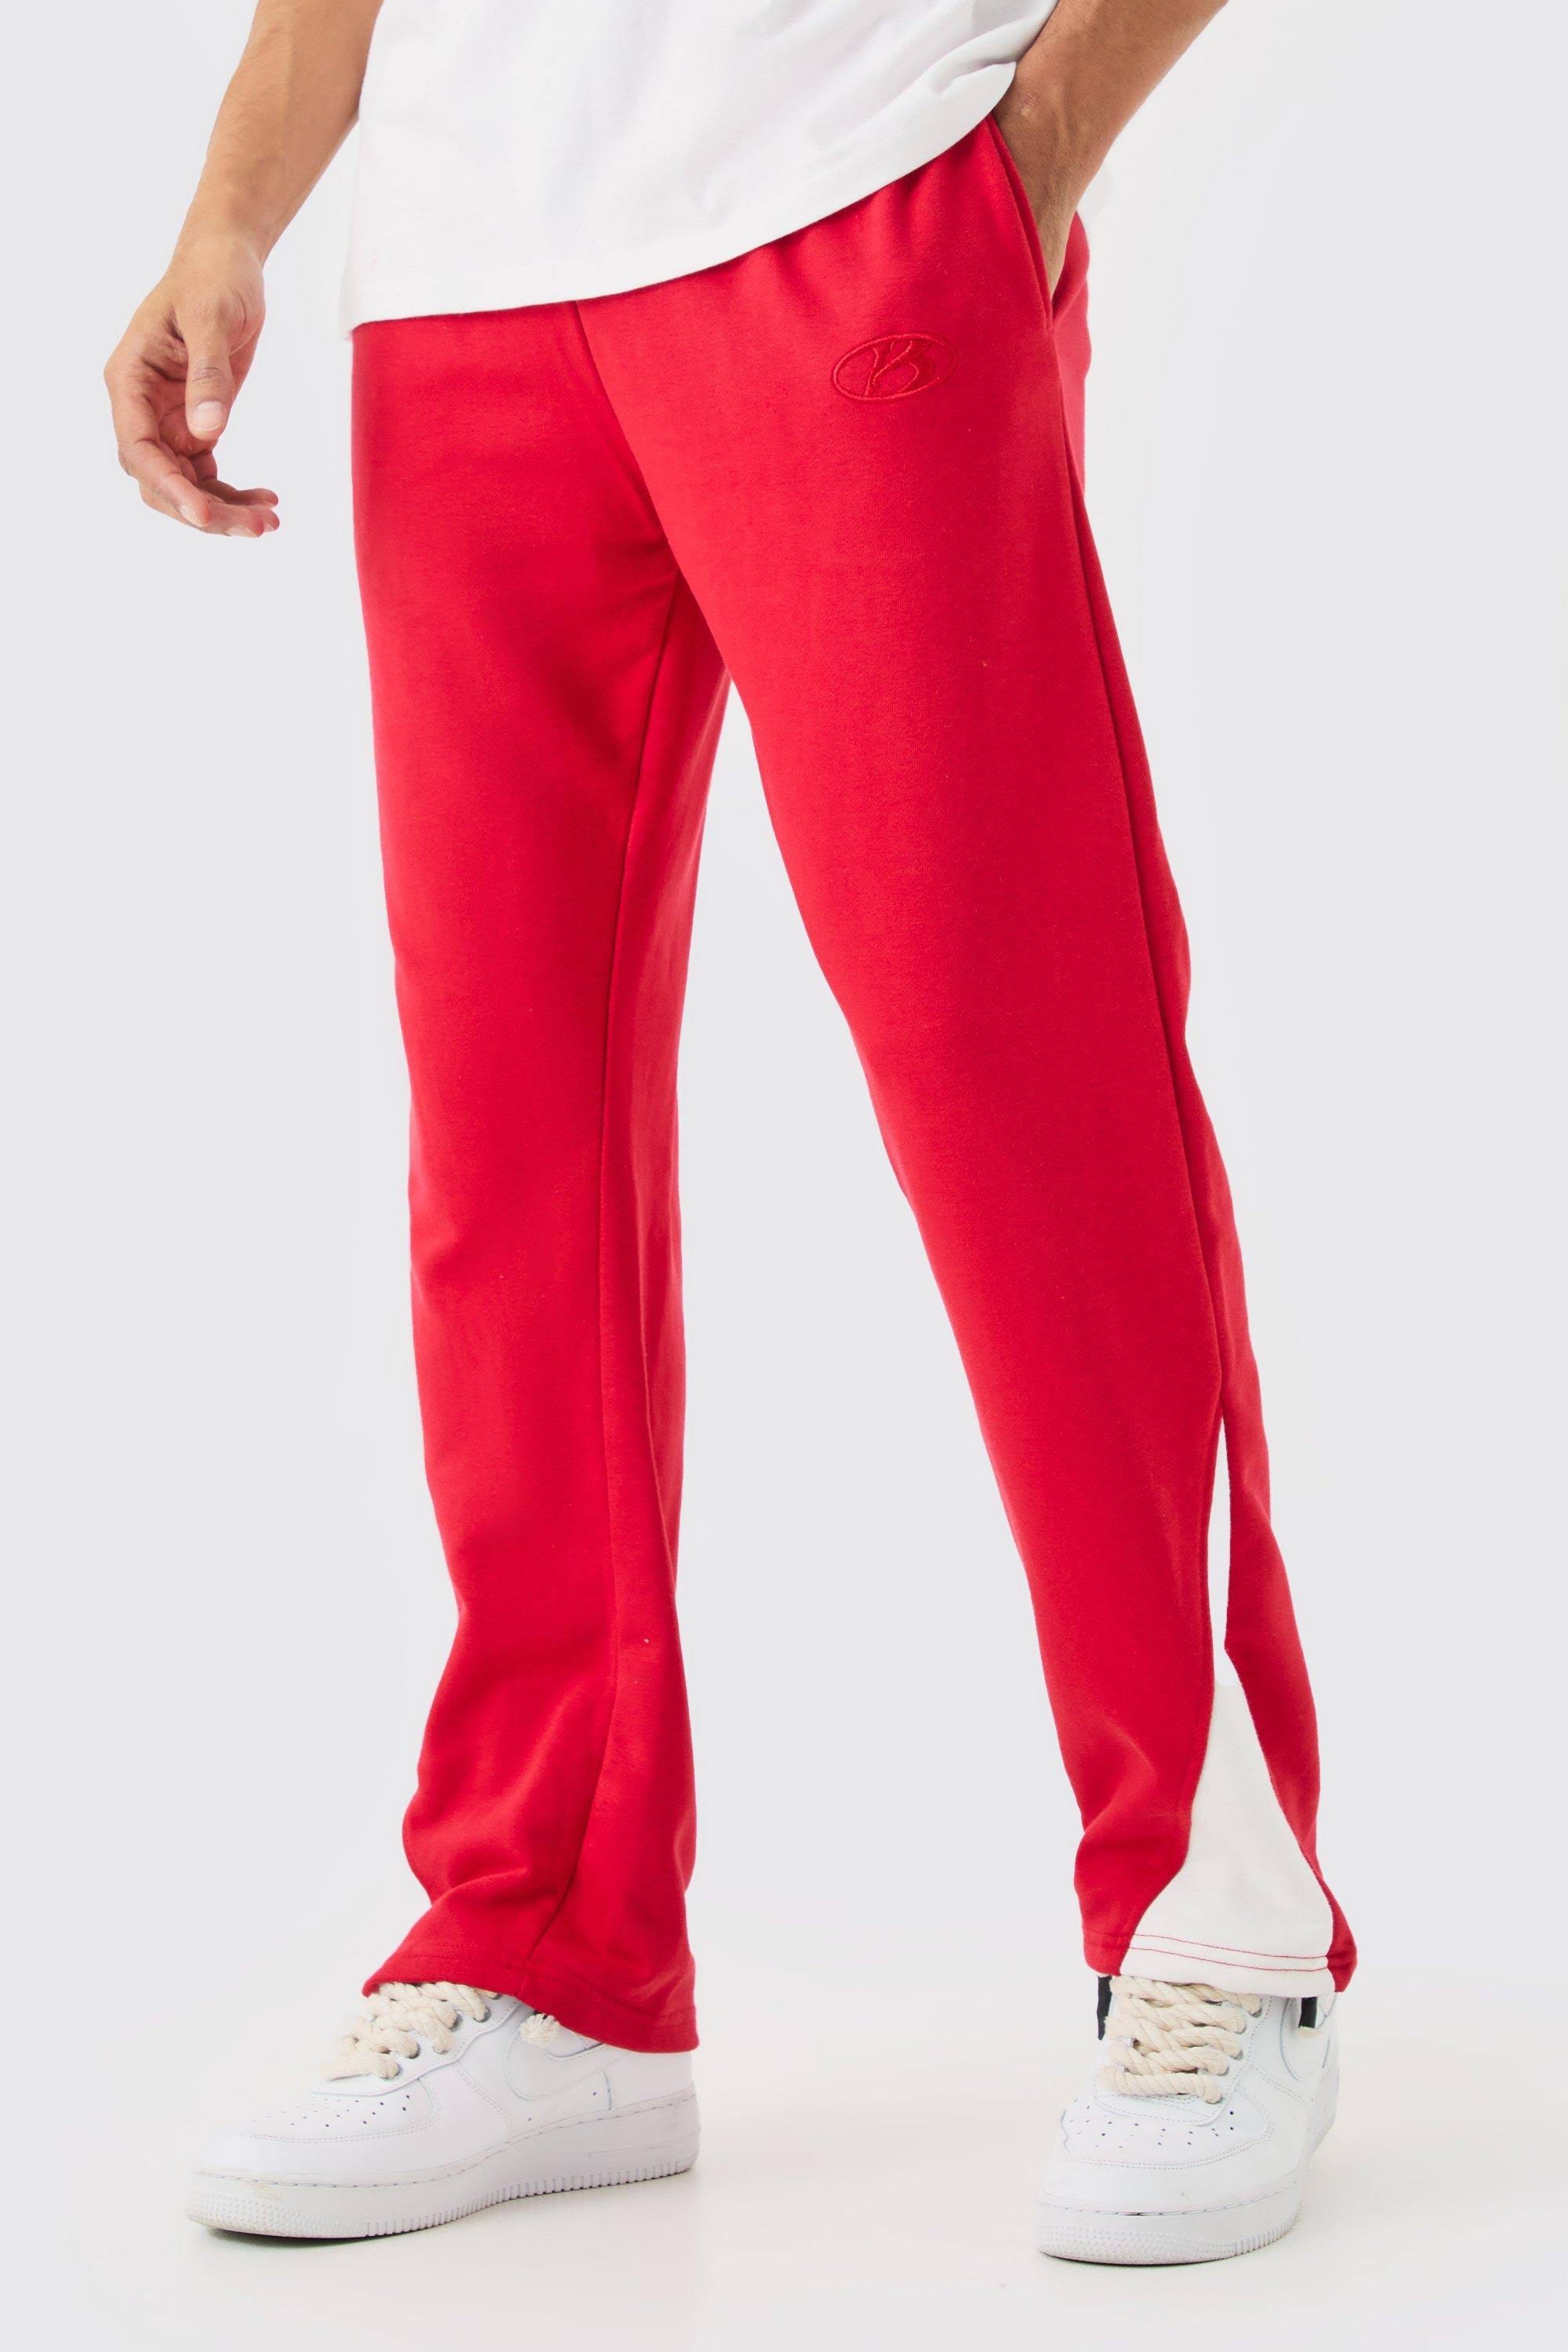 Comfy Red Men's Sweatpants for Everyday | Image